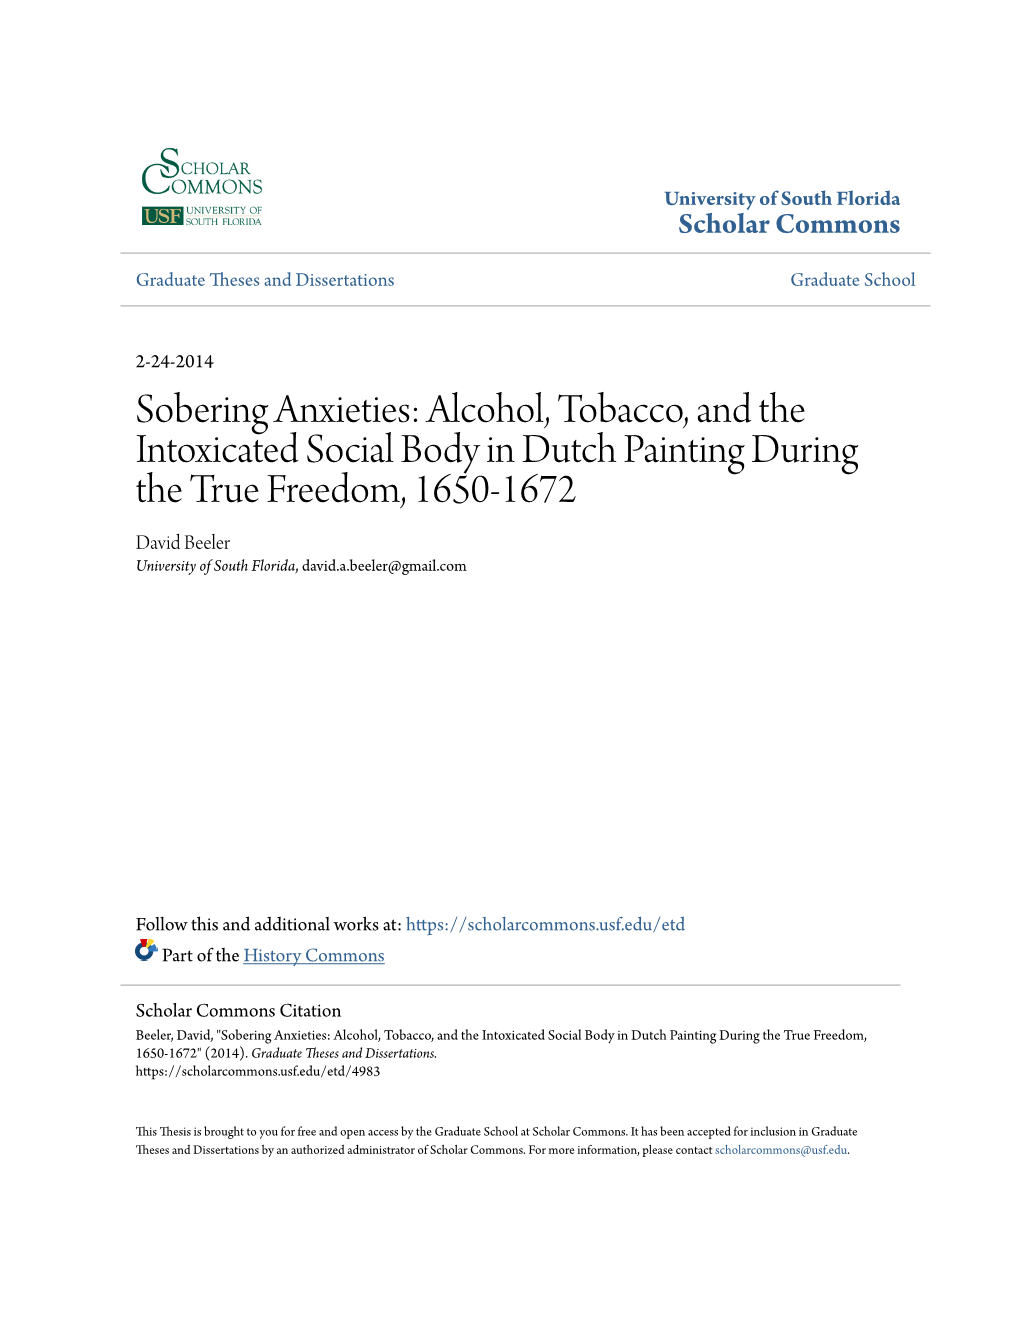 Alcohol, Tobacco, and the Intoxicated Social Body in Dutch Painting